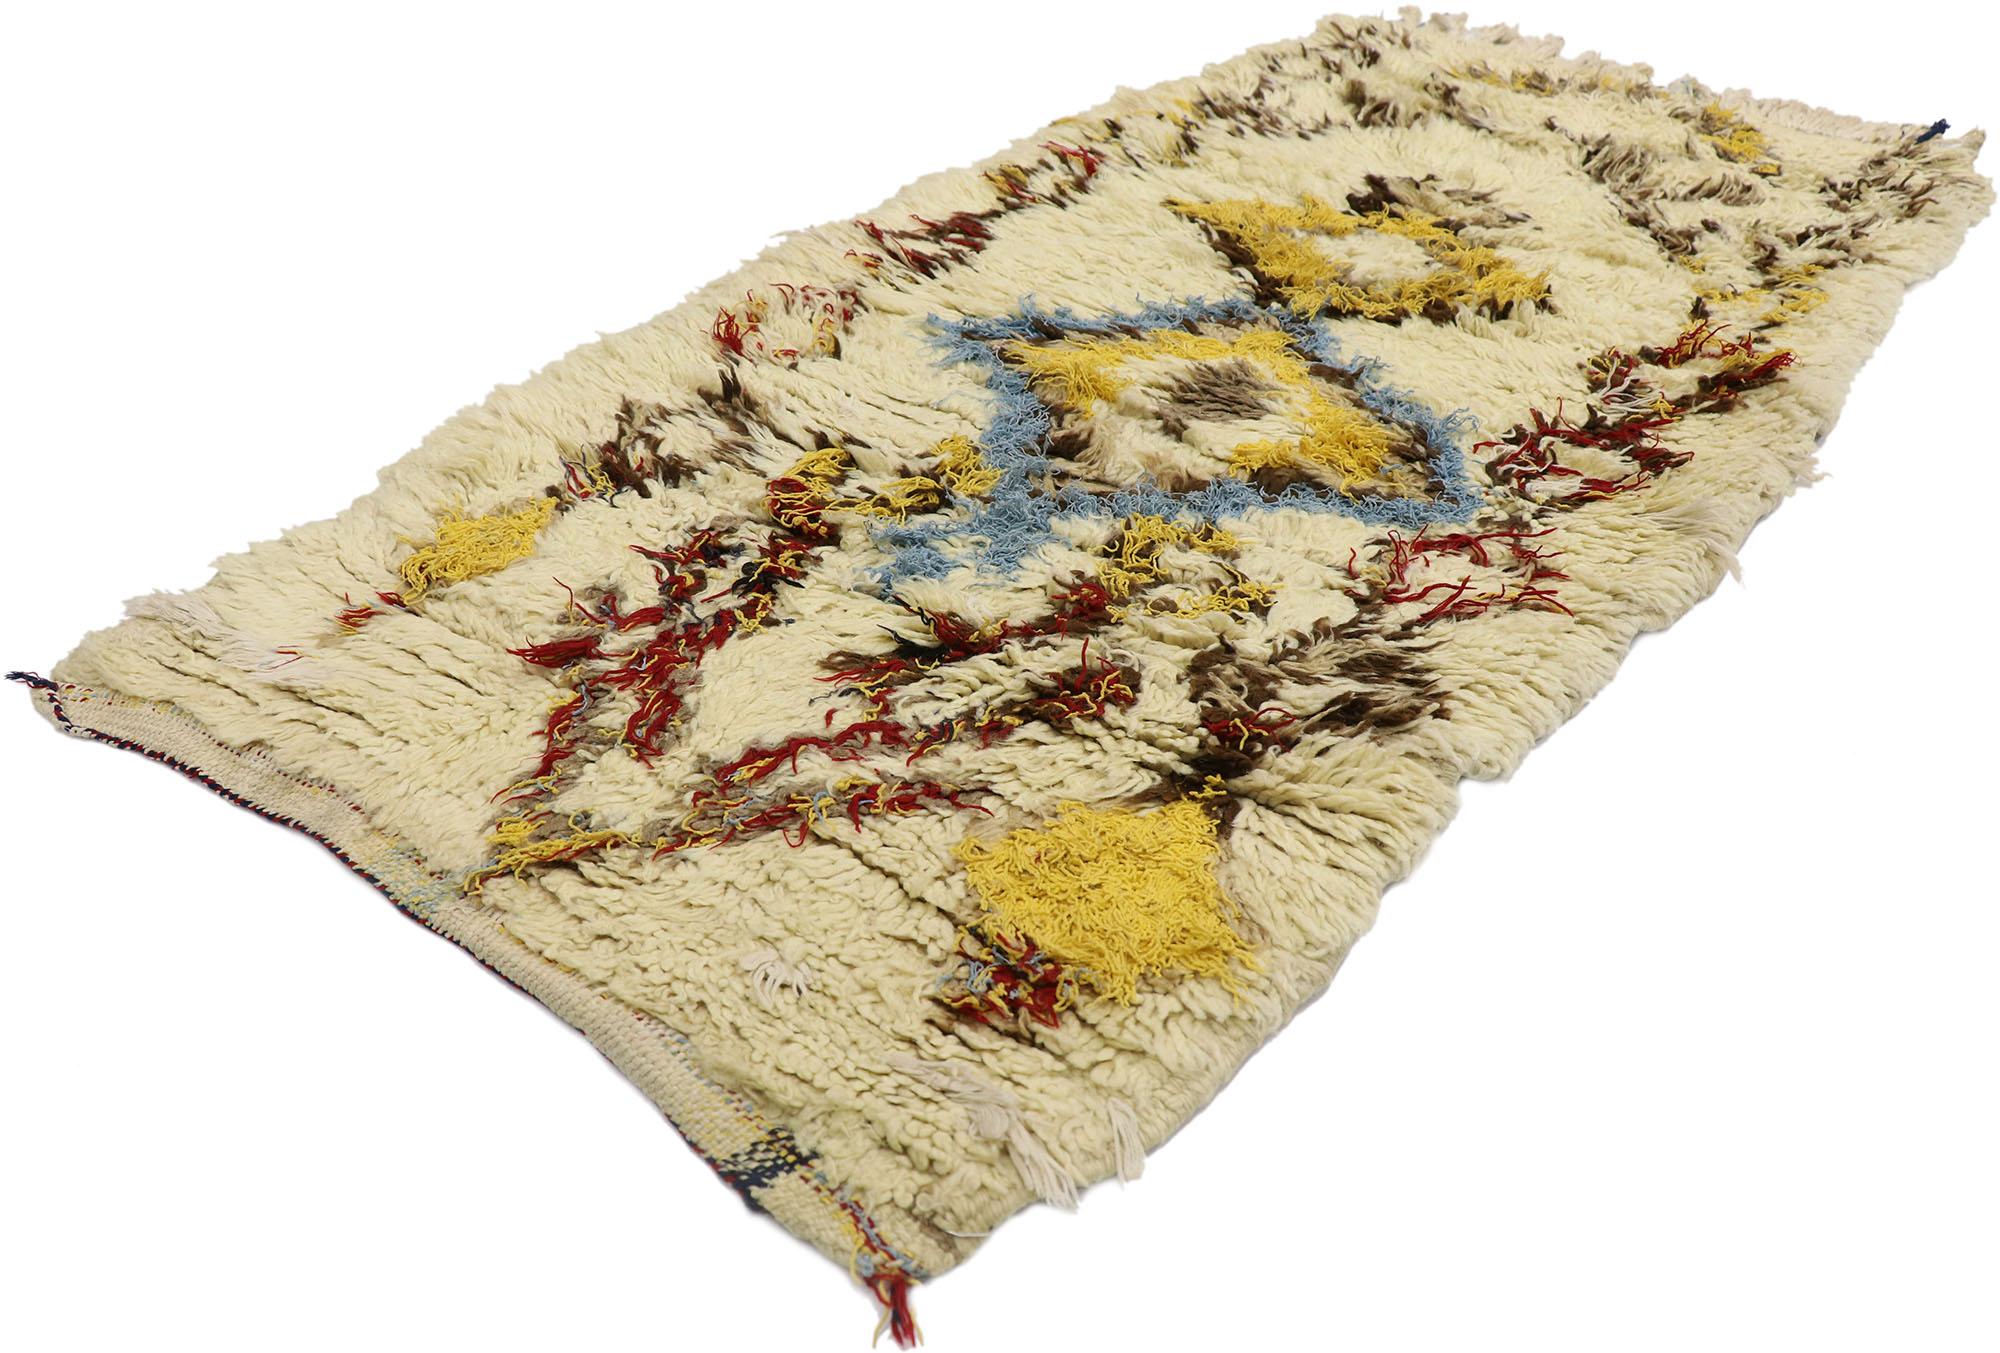 21560 vintage Berber Moroccan Azilal rug with Tribal style 02'07 x 05'05. Showcasing a bold expressive design, incredible detail and texture, this hand knotted wool vintage Berber Moroccan Azilal rug is a captivating vision of woven beauty. The